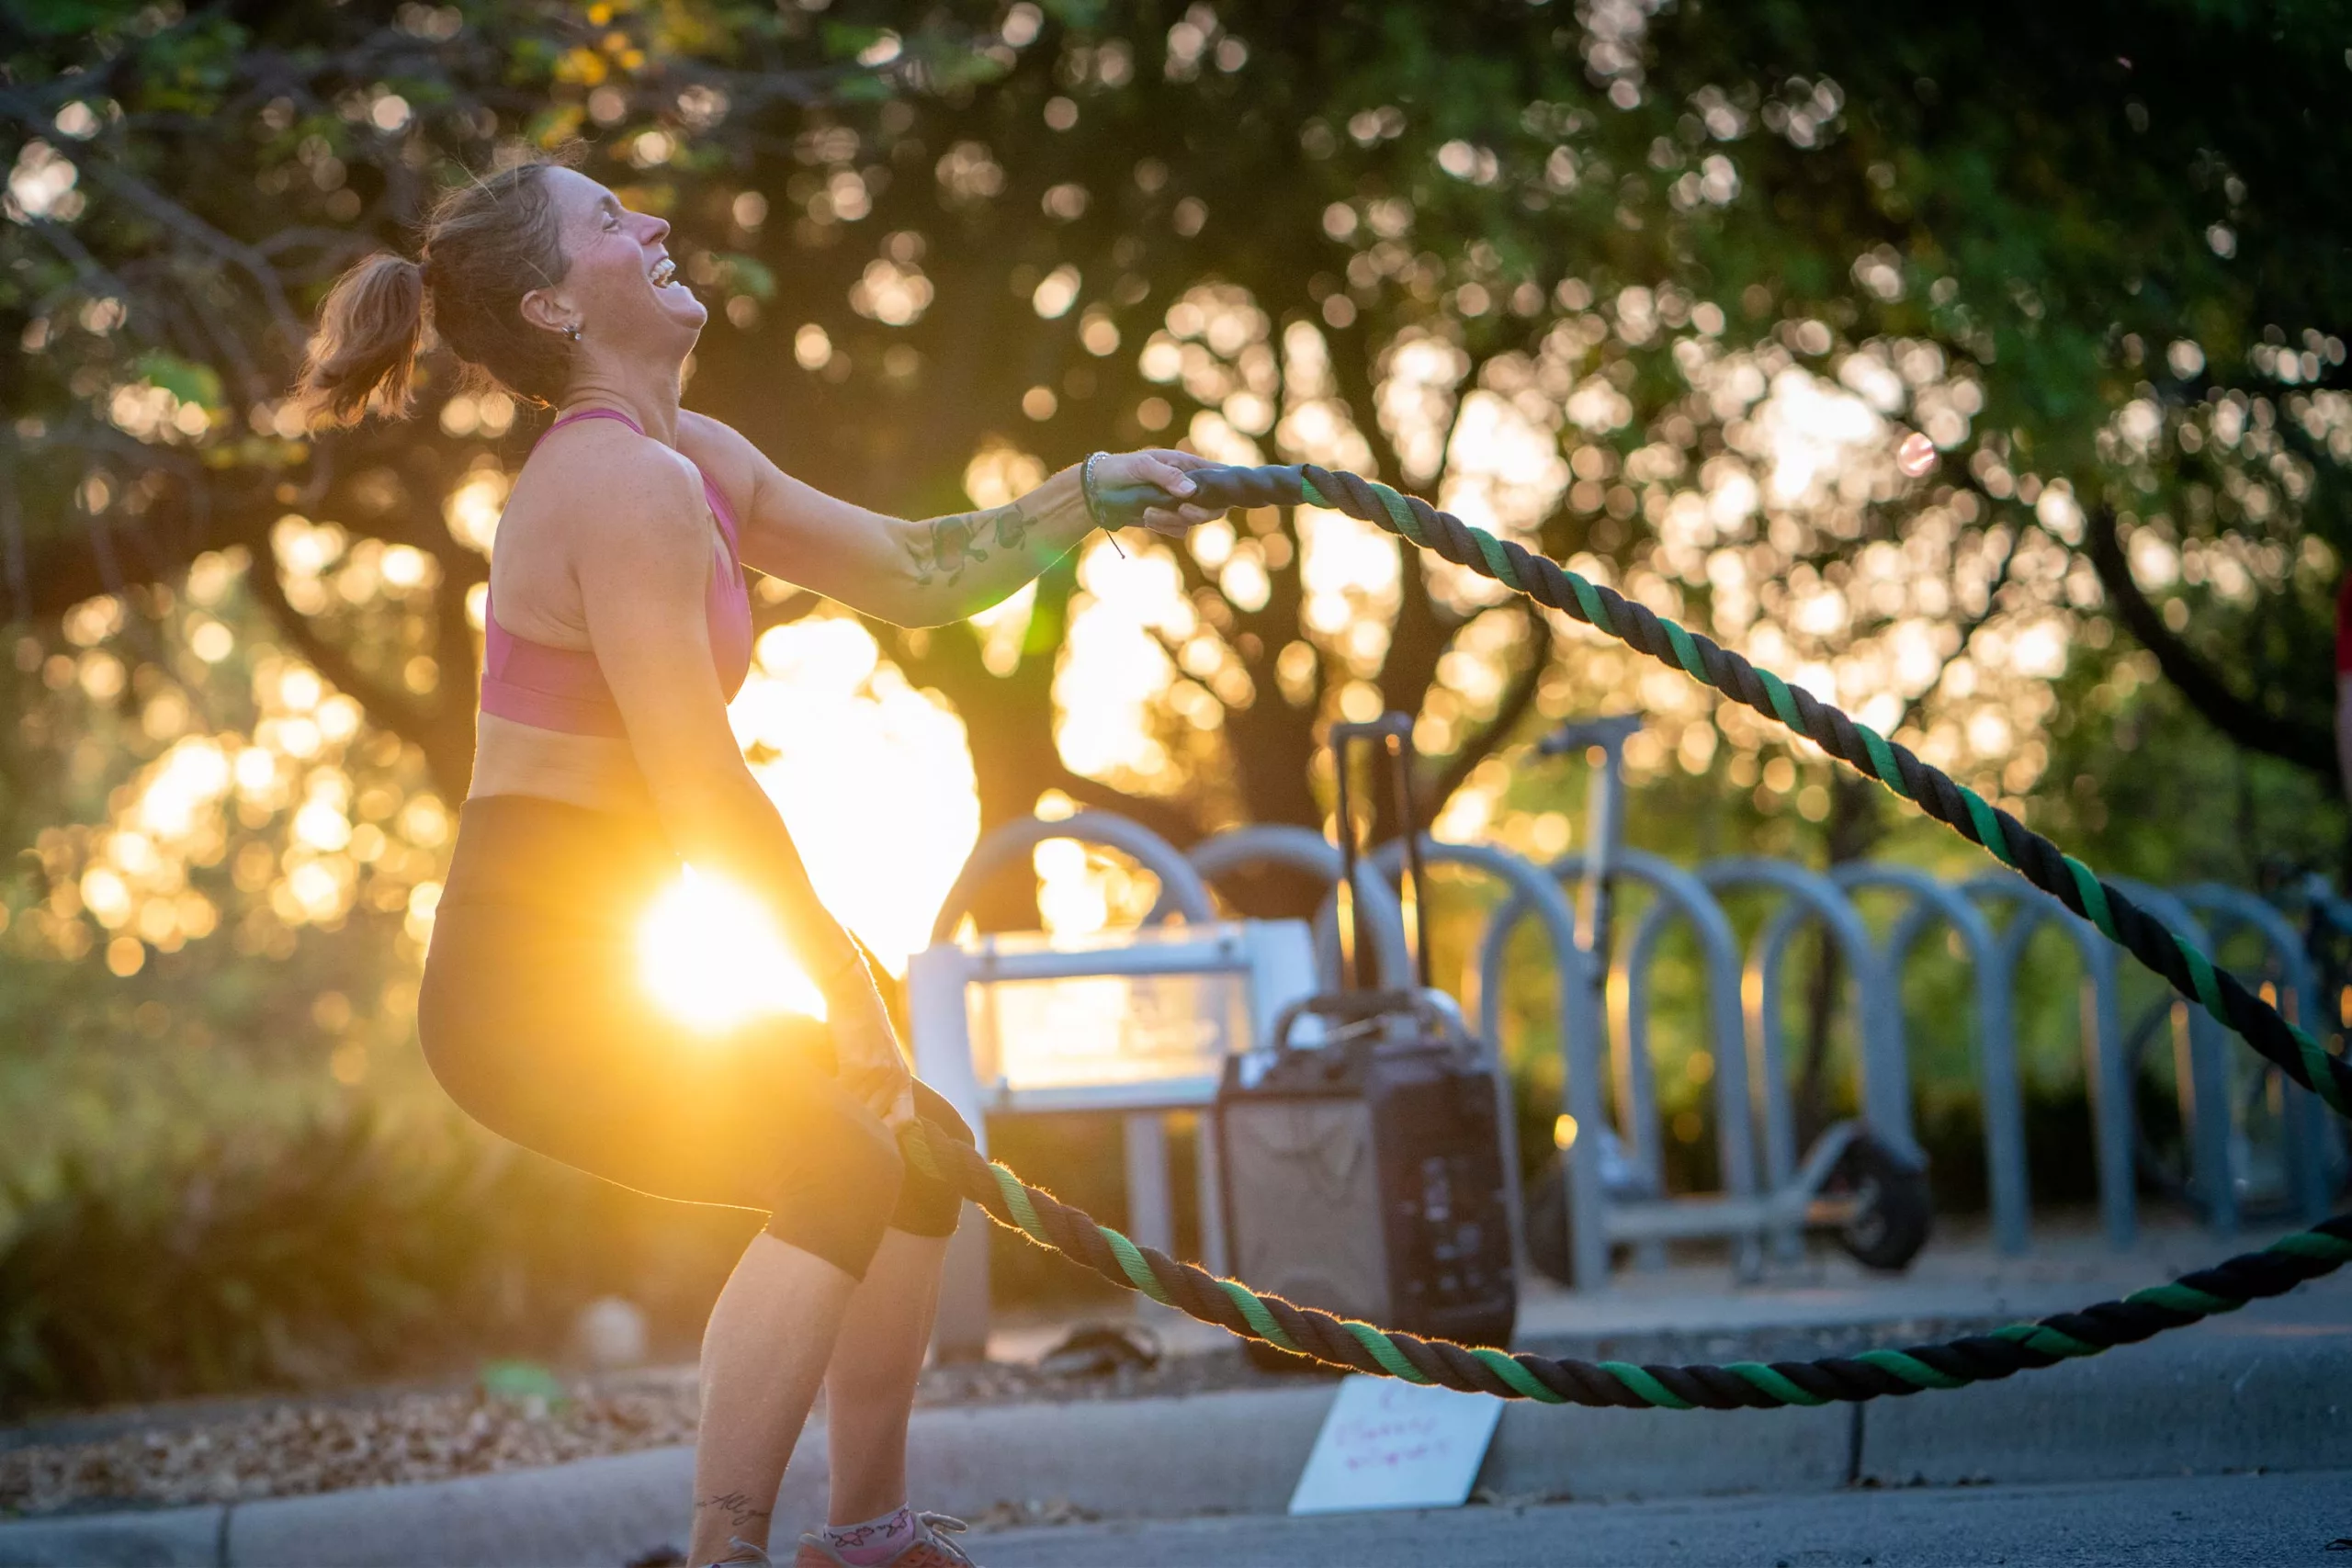 A woman exercises outdoors in the setting sun using battle ropes. Her head is flung back in joyful exertion.